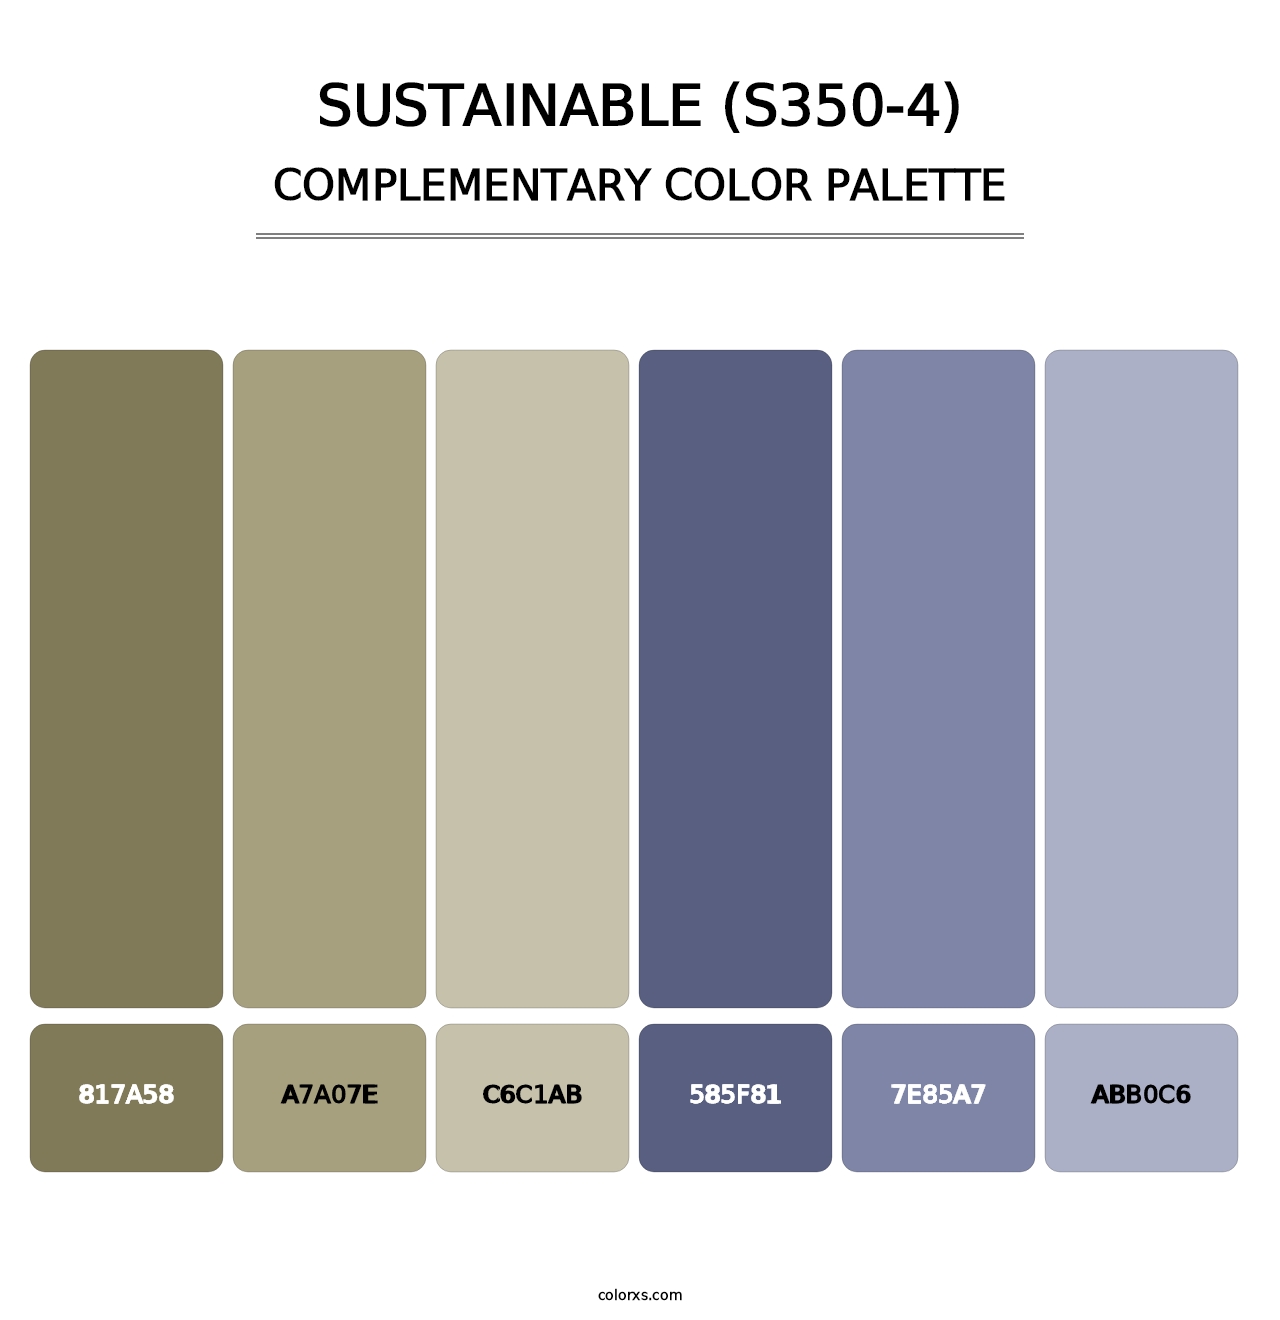 Sustainable (S350-4) - Complementary Color Palette